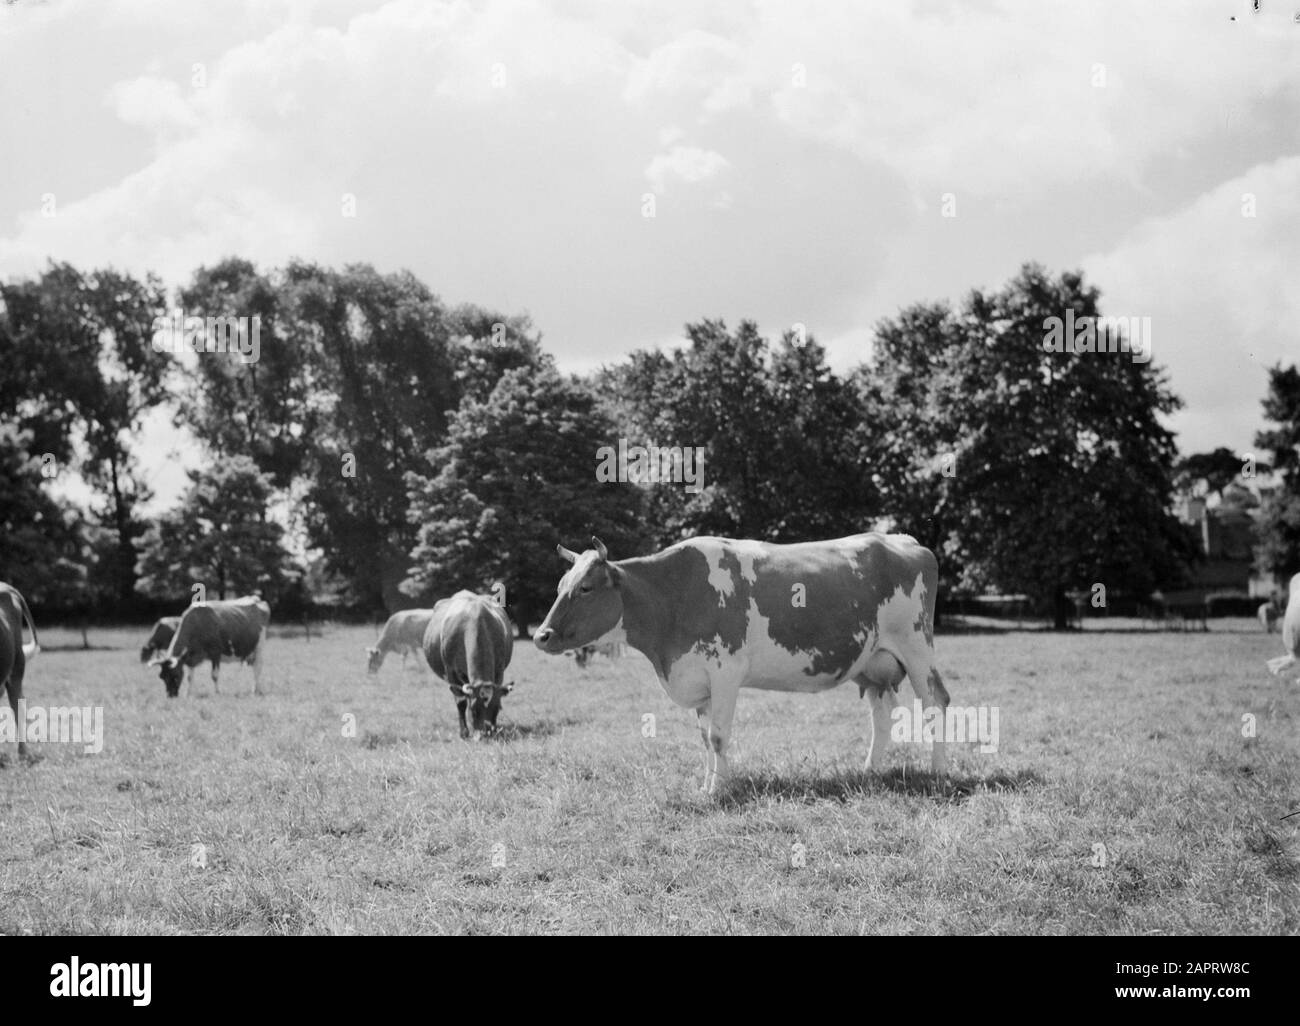 Frisian cows in the meadow  A Frisian red bont cow in the meadow with trees in the background Date: undated Keywords: trees, grazing, cows, meadows Stock Photo